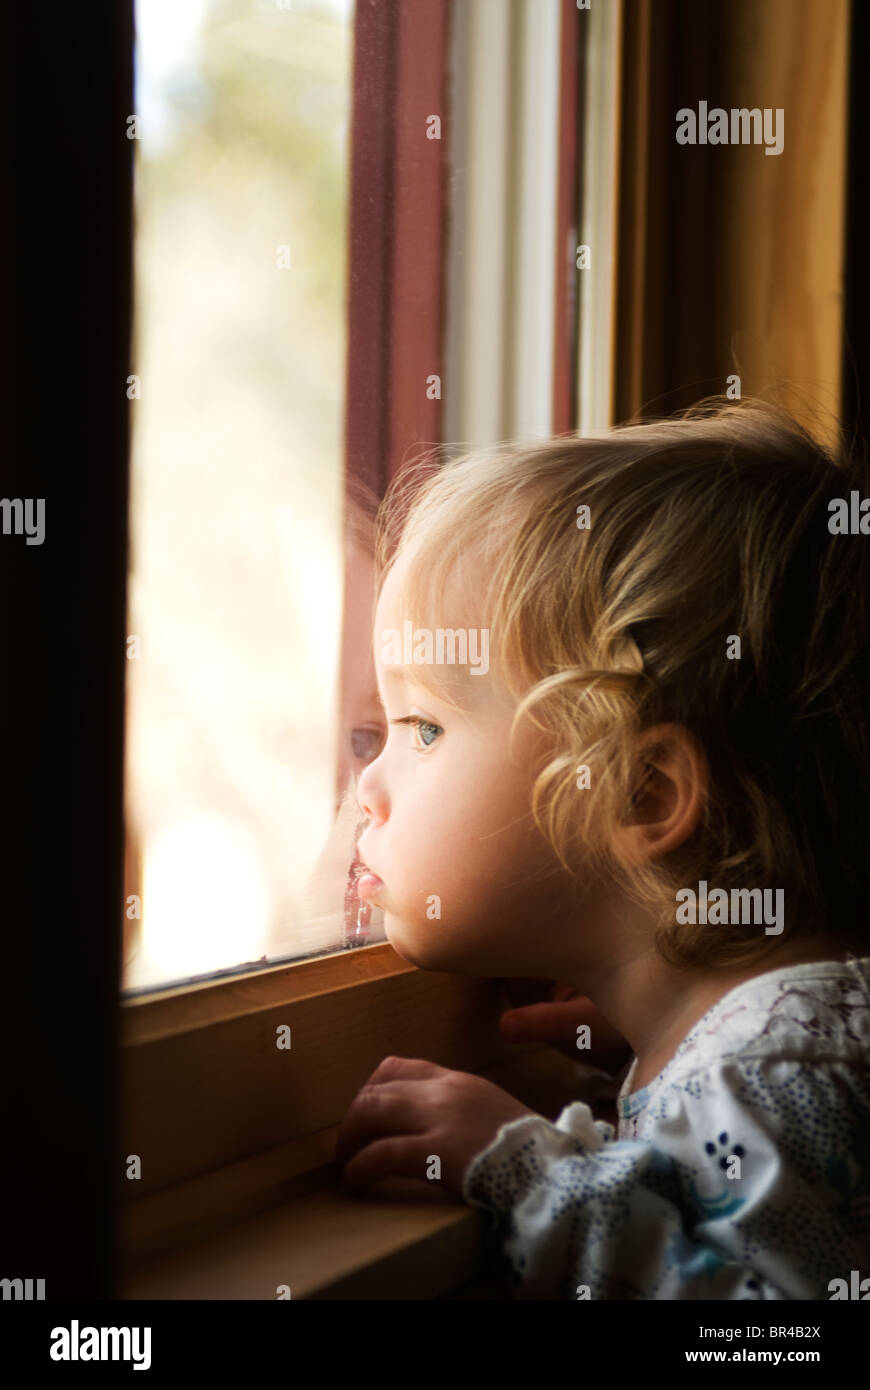 A curious toddler looks out the window at the world outside, Flagstaff, Arizona. Stock Photo